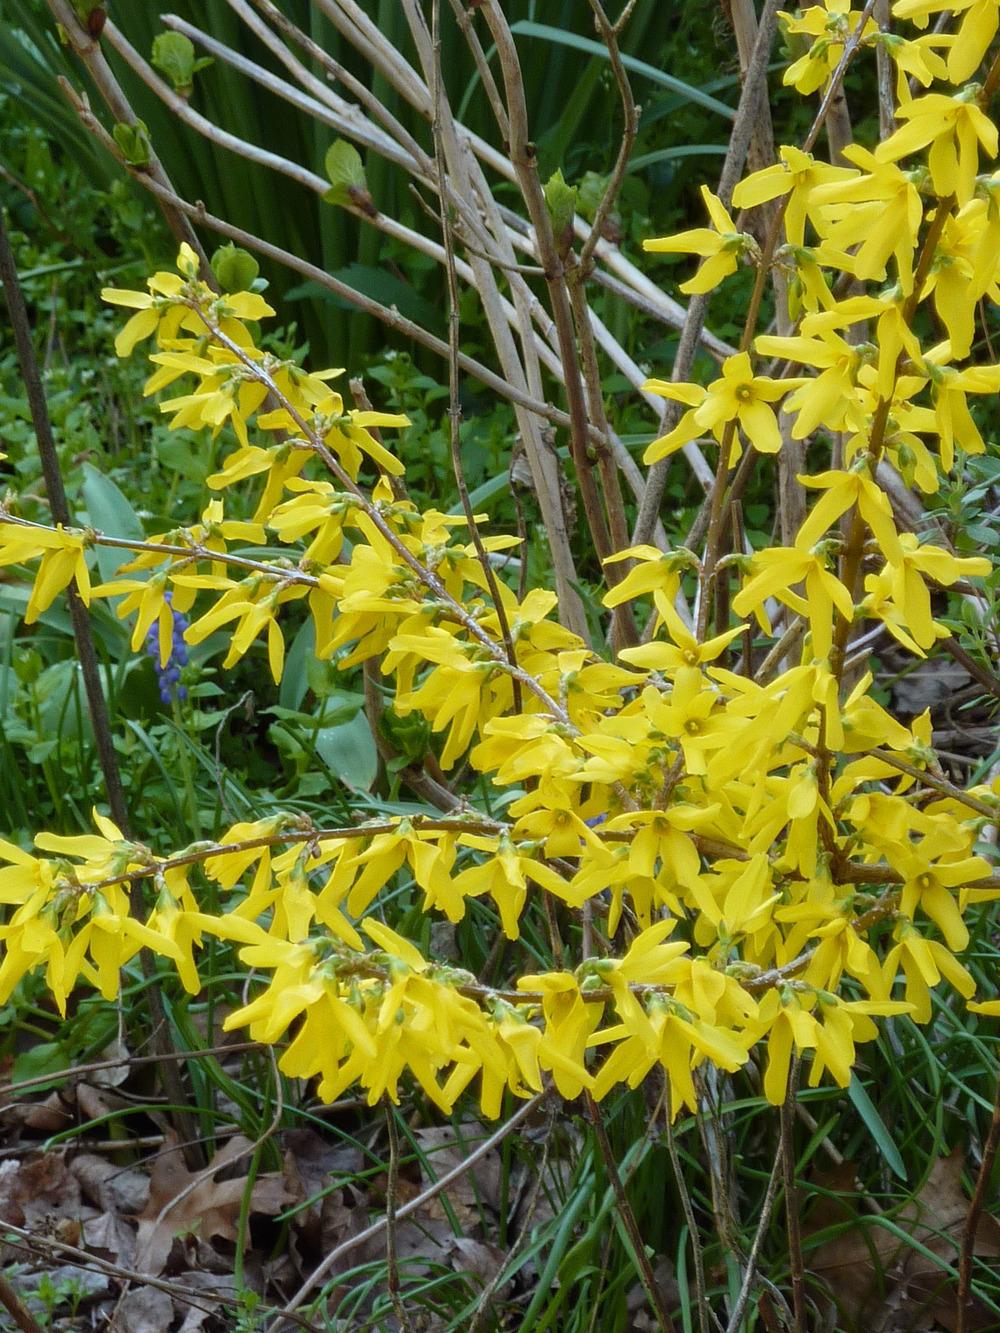 Photo of Forsythia uploaded by sandnsea2